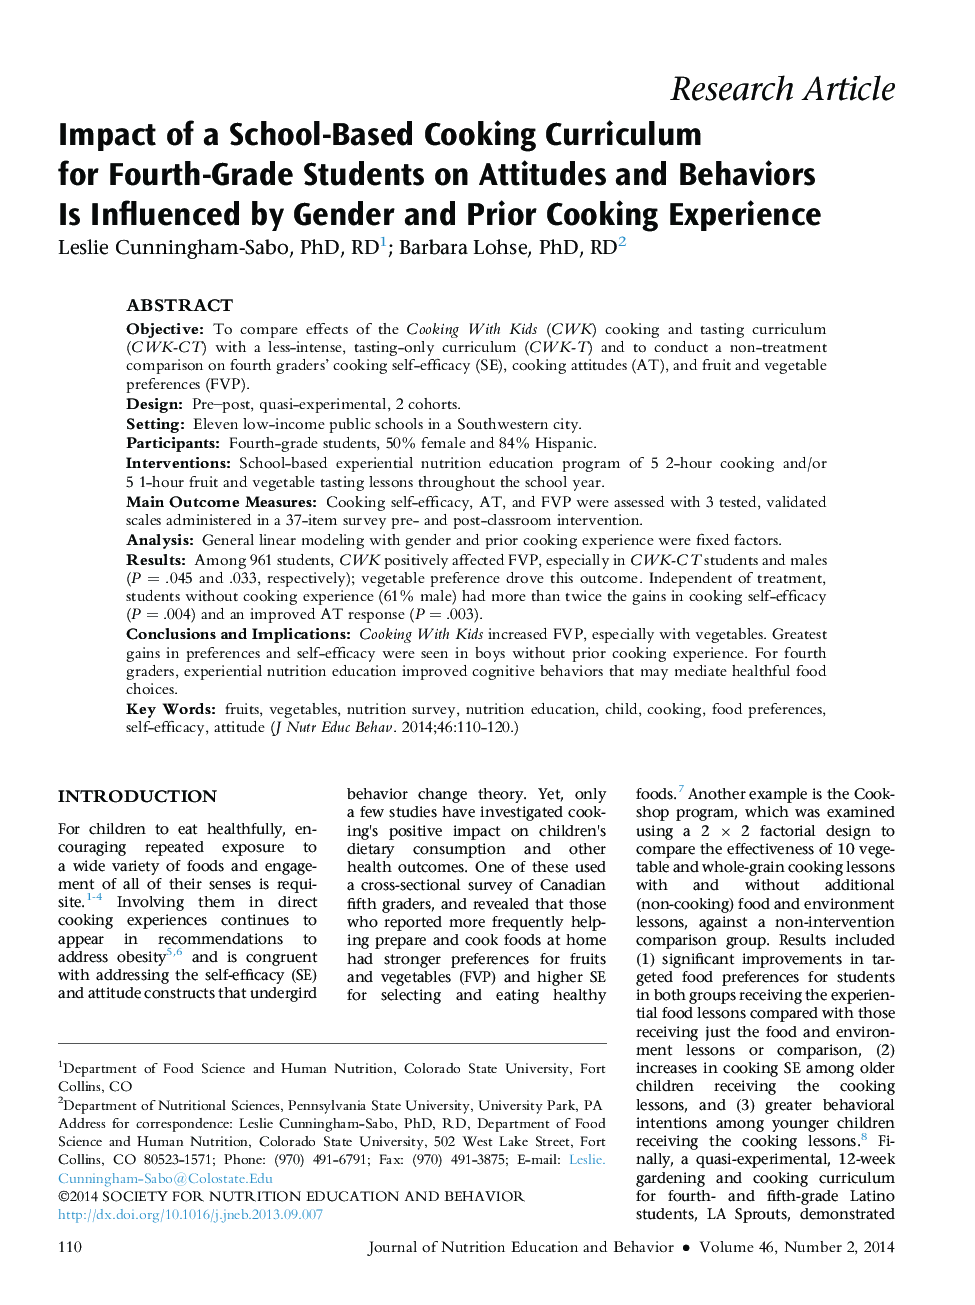 Impact of a School-Based Cooking Curriculum for Fourth-Grade Students on Attitudes and Behaviors Is Influenced by Gender and Prior Cooking Experience